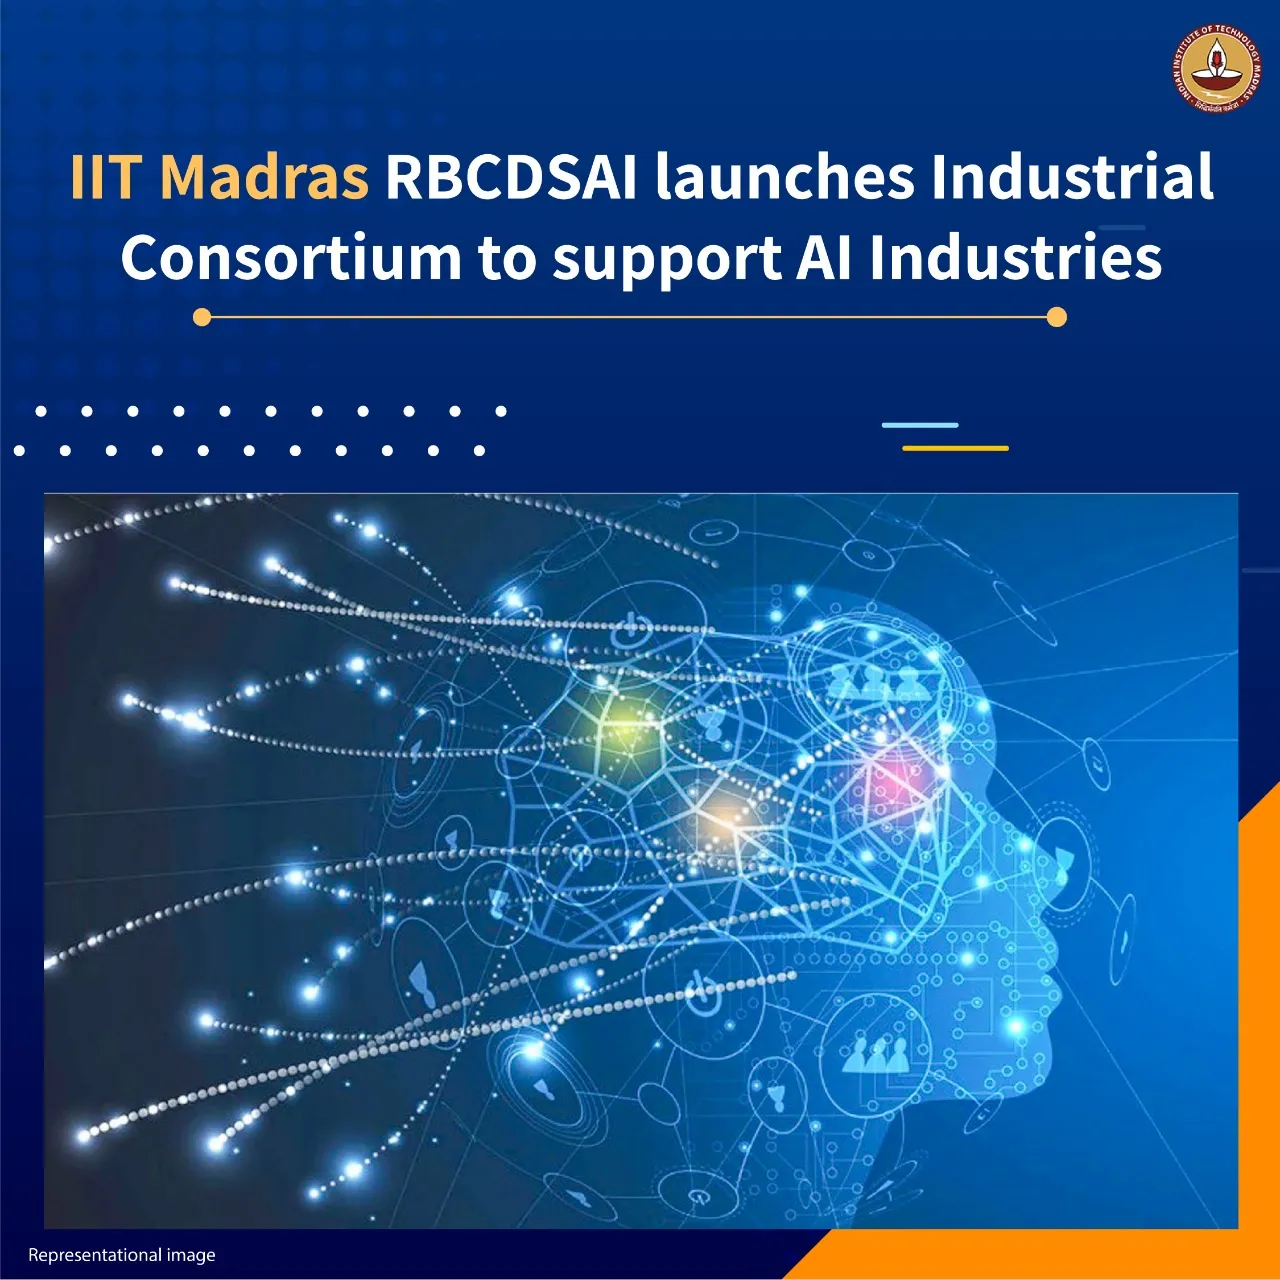 RBCDSAI launches Industrial Consortium to support AI in Industries